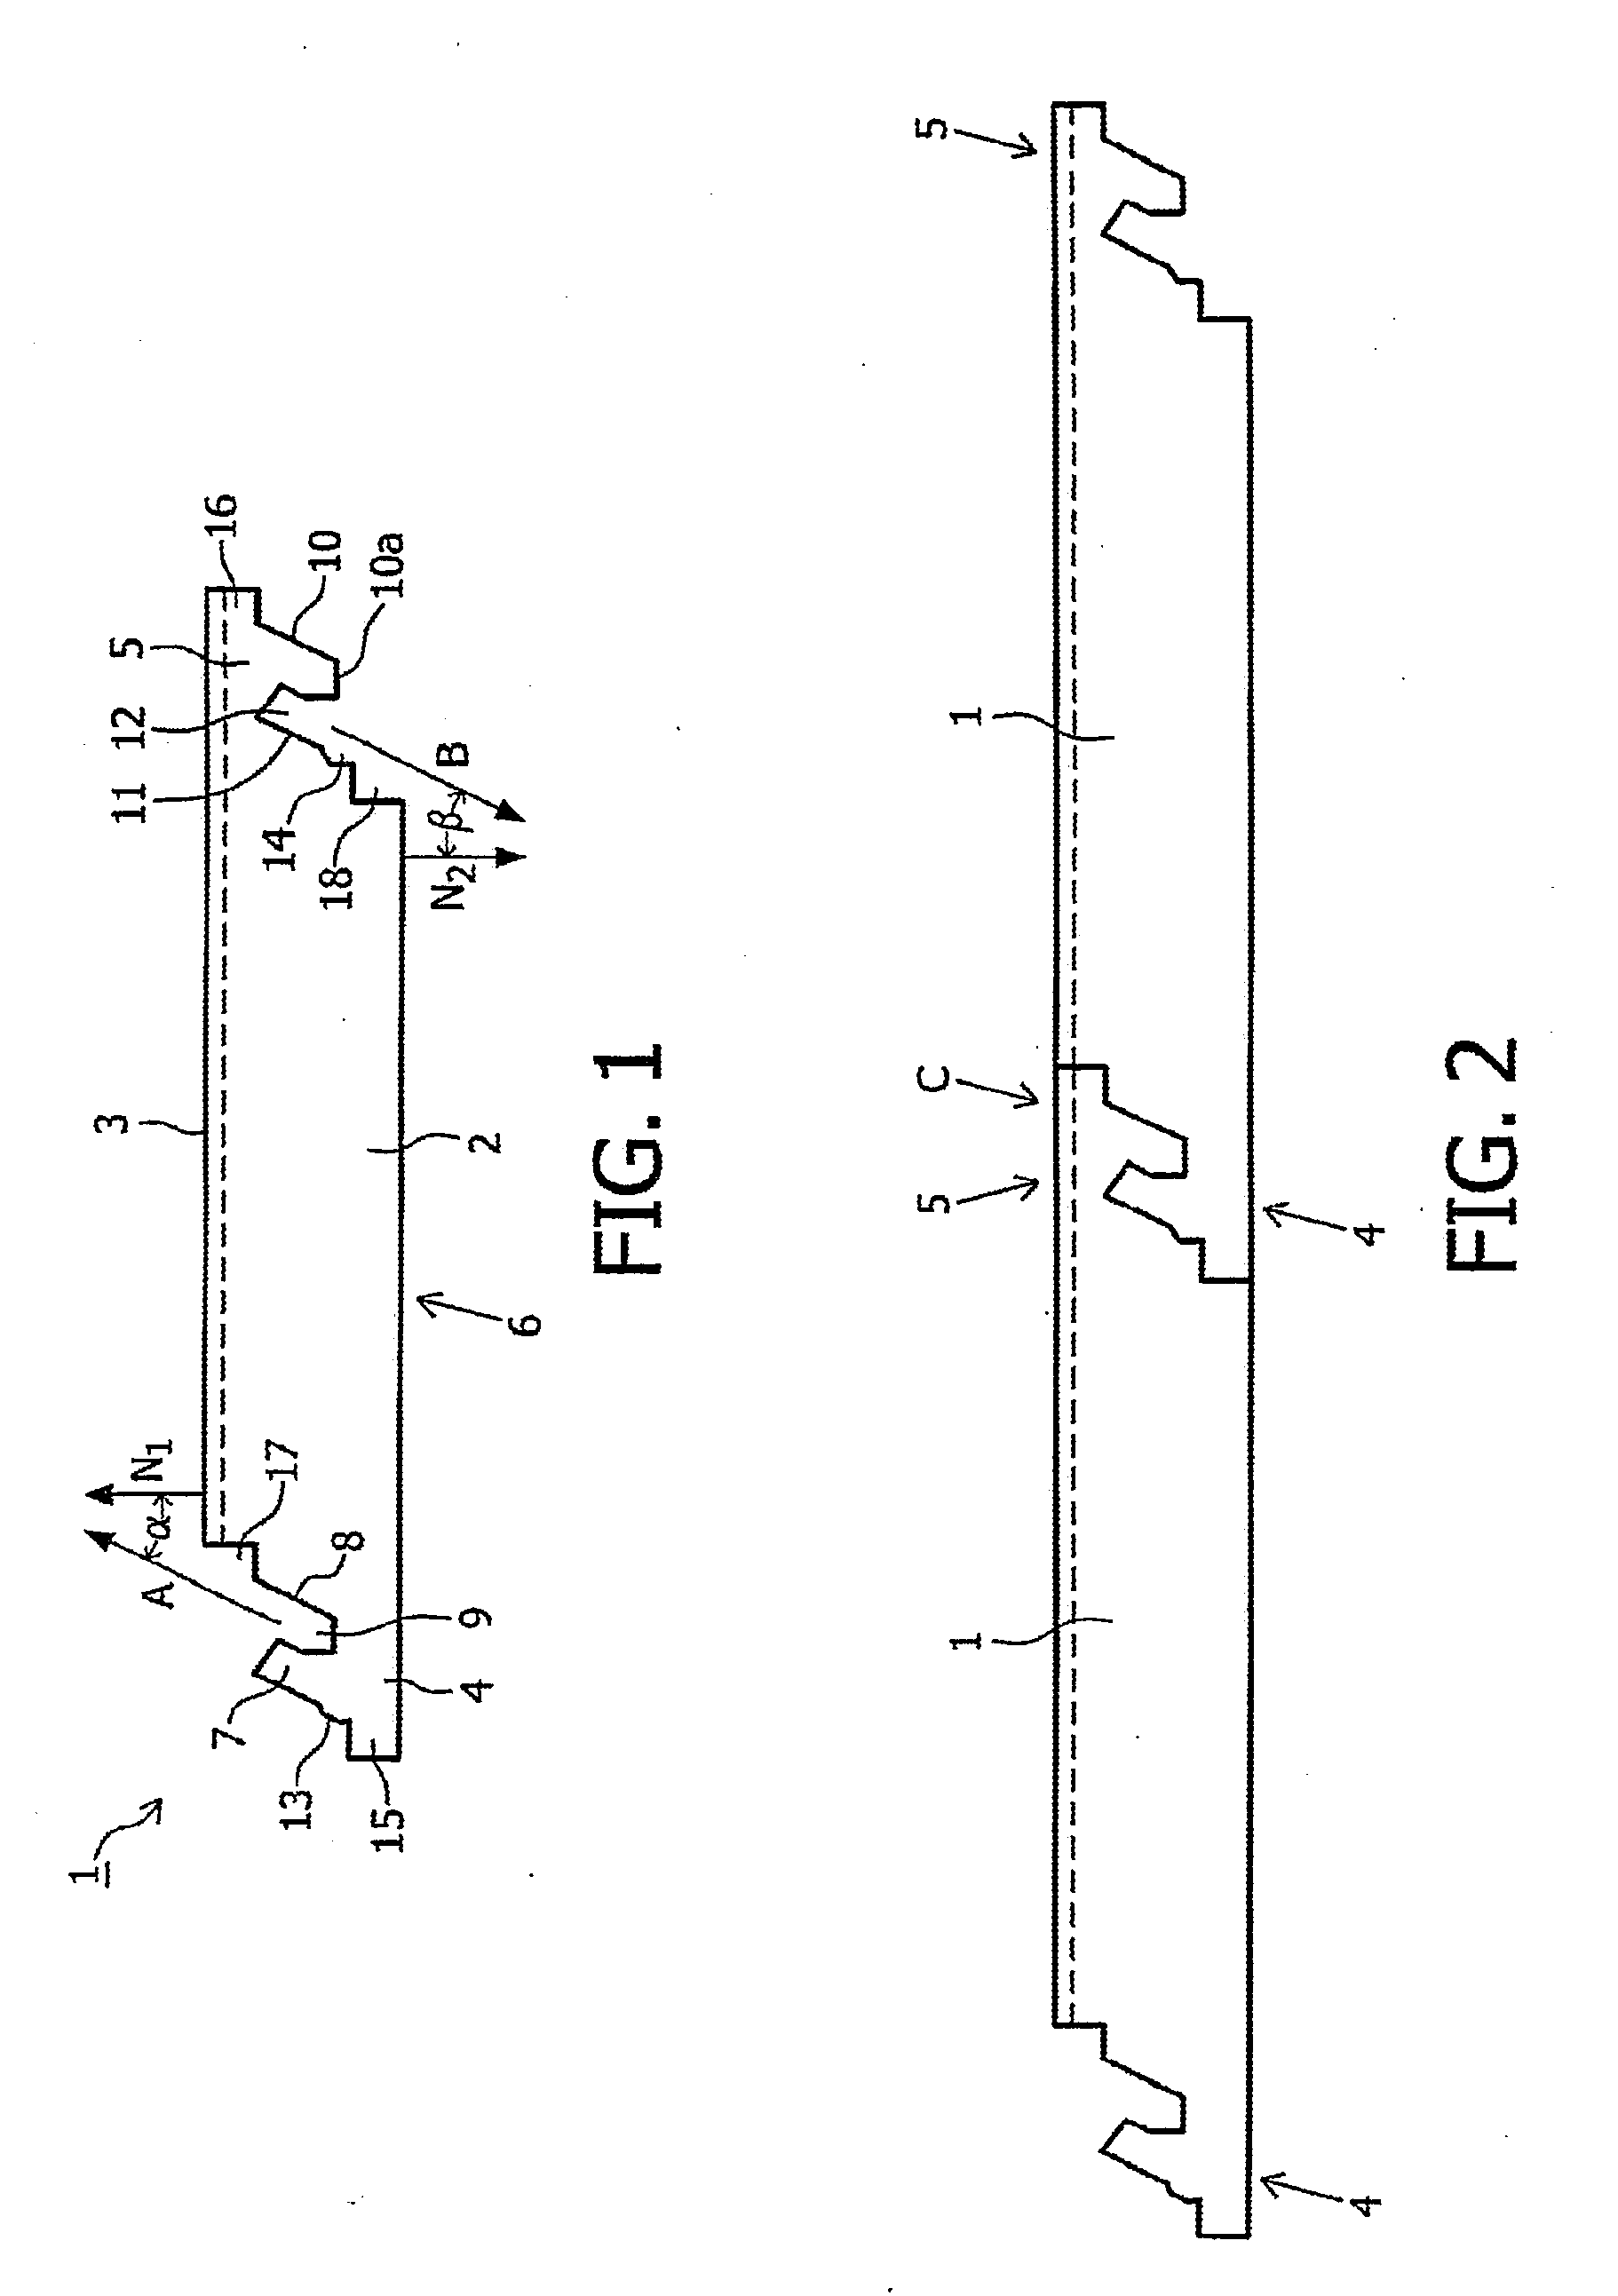 Floor Panel and Floor Covering Consisting of a Plurality of Such Floor Panels